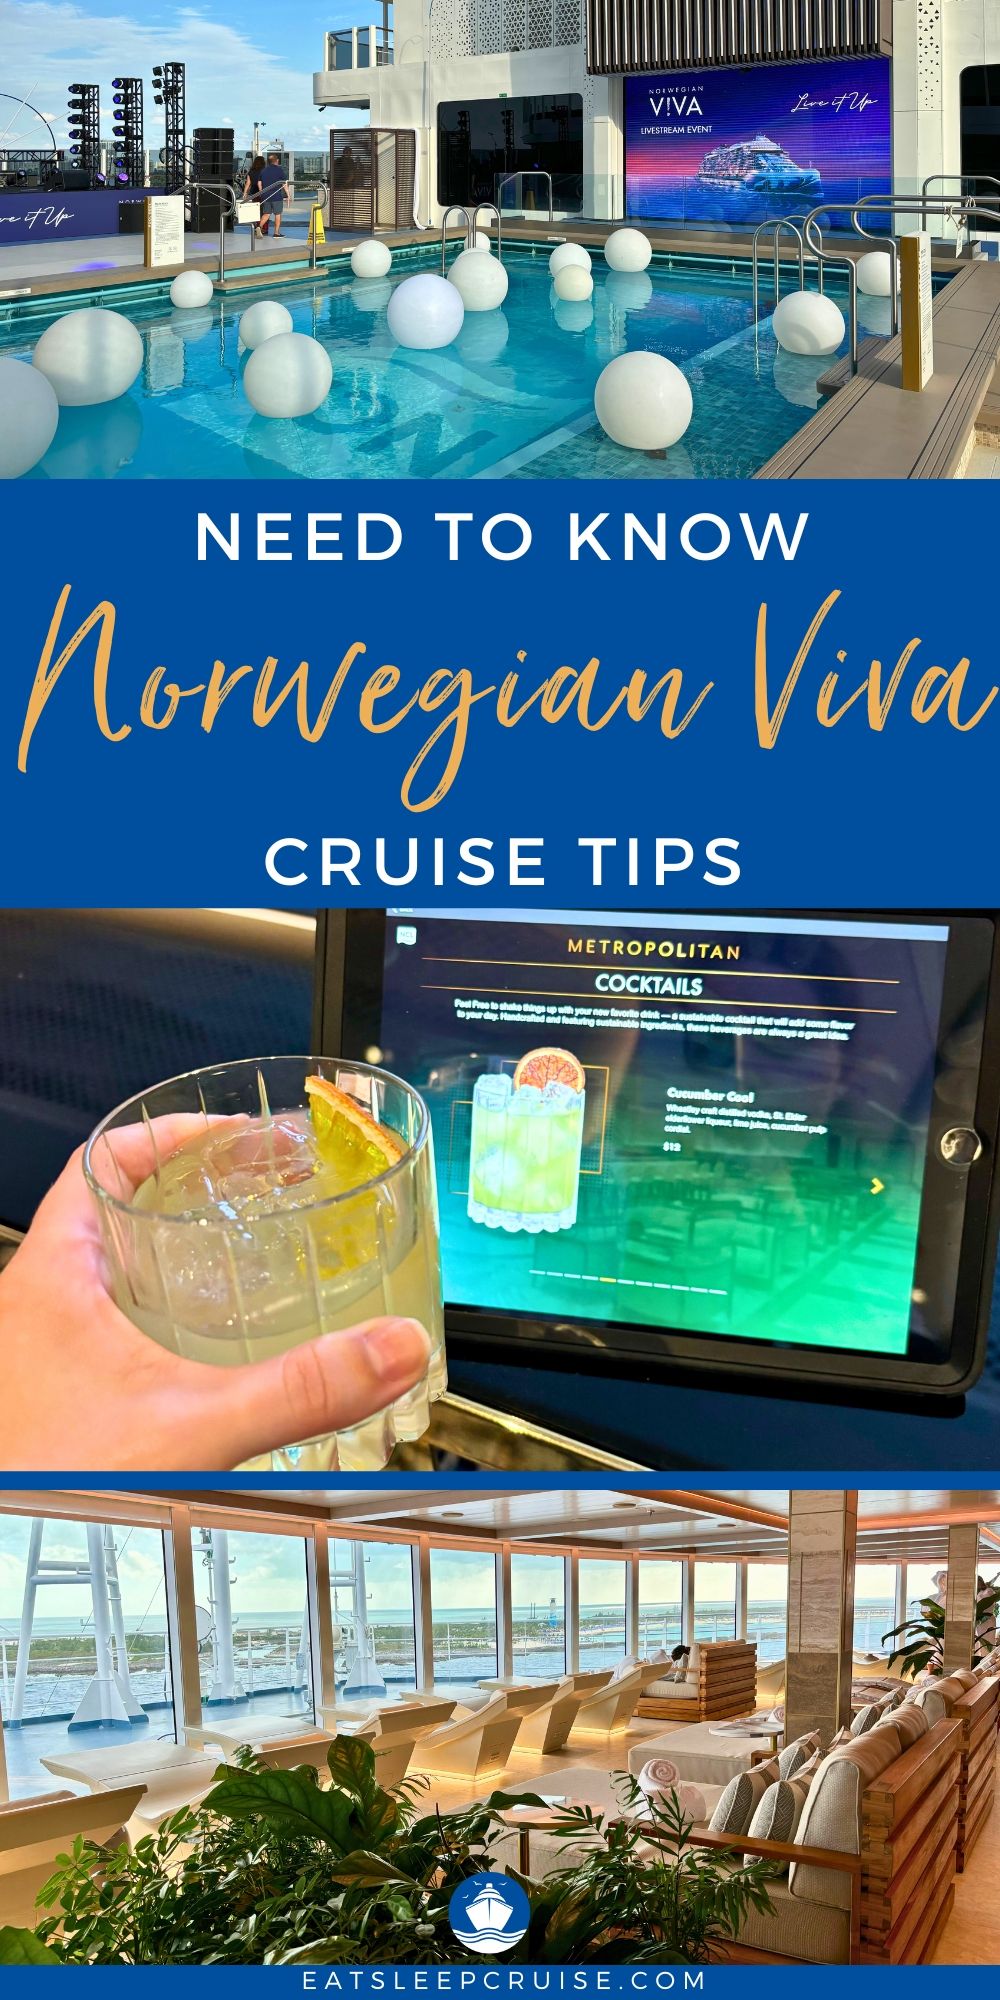 What You Should Know Before Taking a Norwegian Viva Cruise